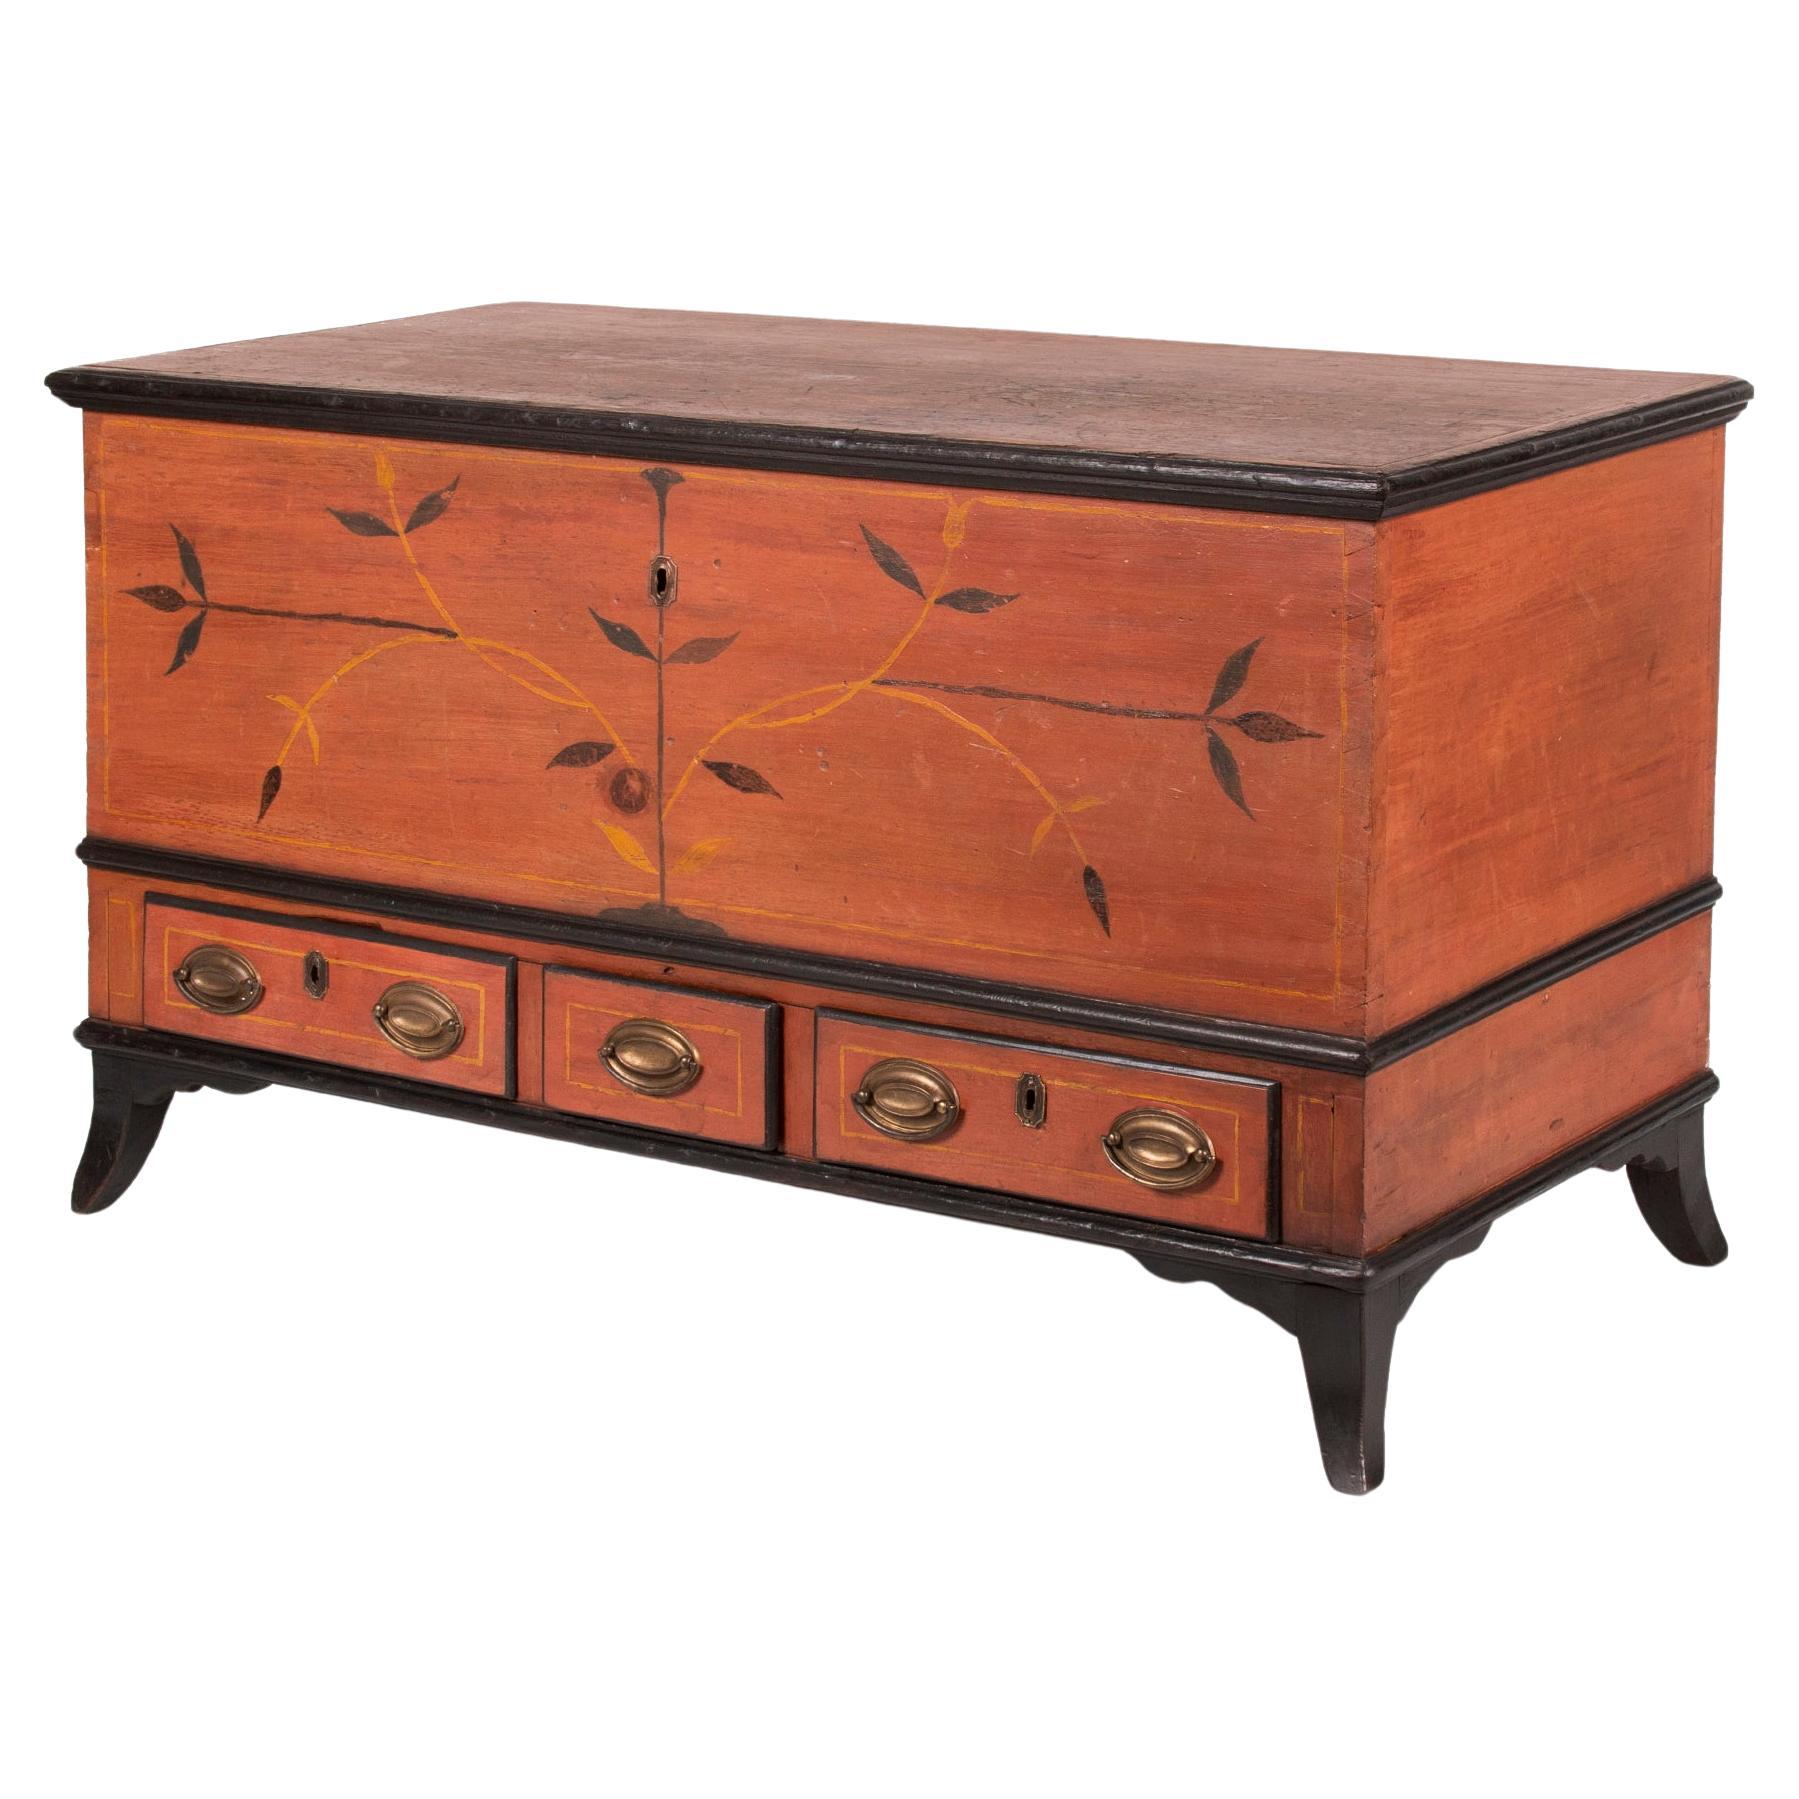 Centre County Pennsylvania Blanket Chest with Salmon and Black Floral Decoration For Sale